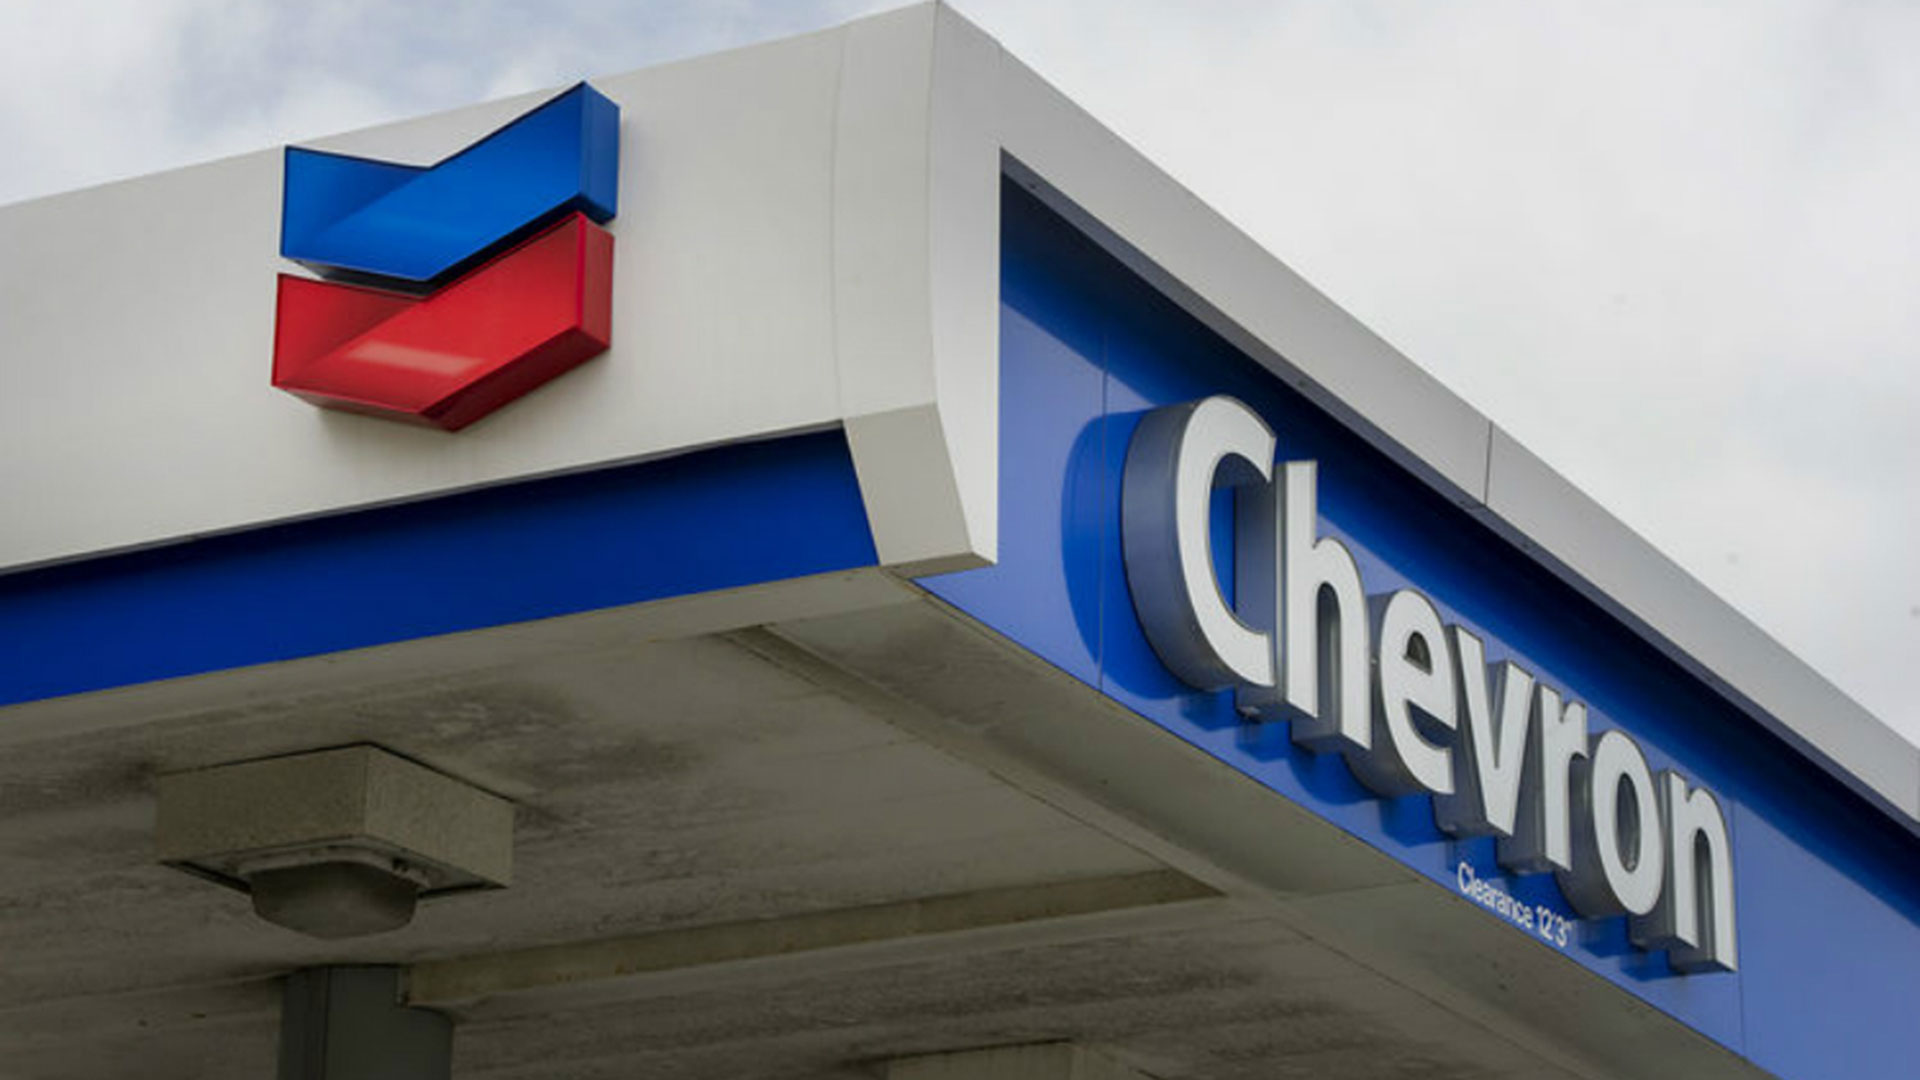 The United States government authorized Chevron to reactivate its operations in Venezuela as a strategy to stabilize the oil market